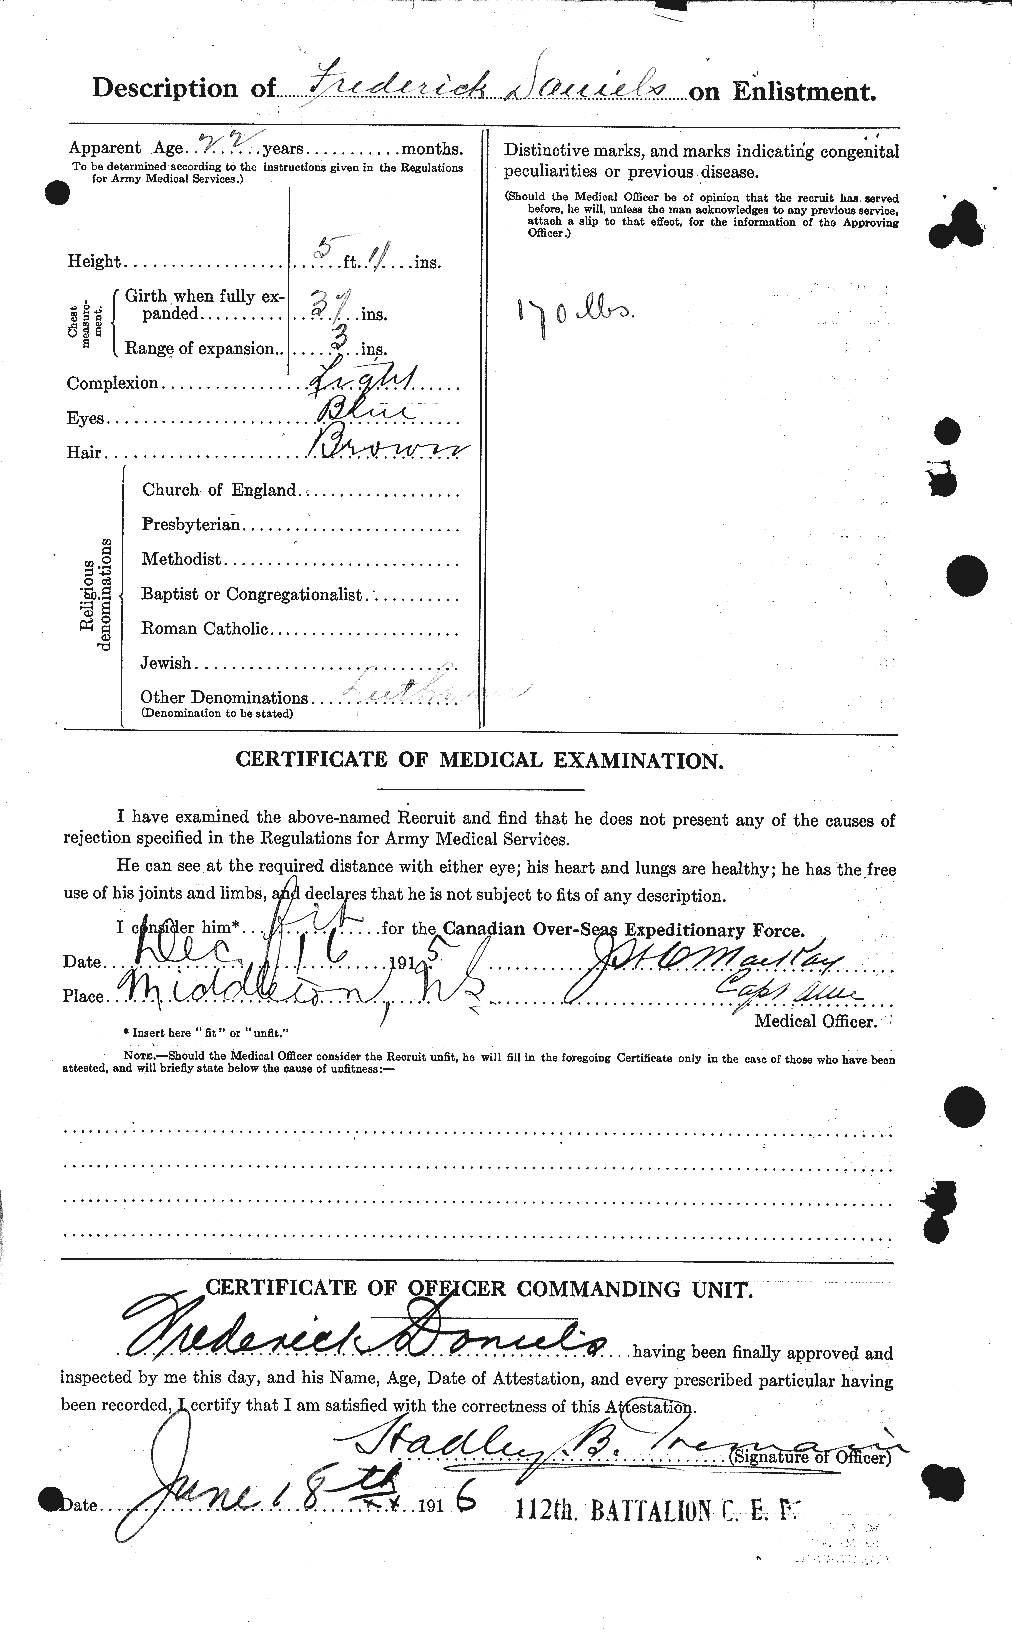 Personnel Records of the First World War - CEF 279596b